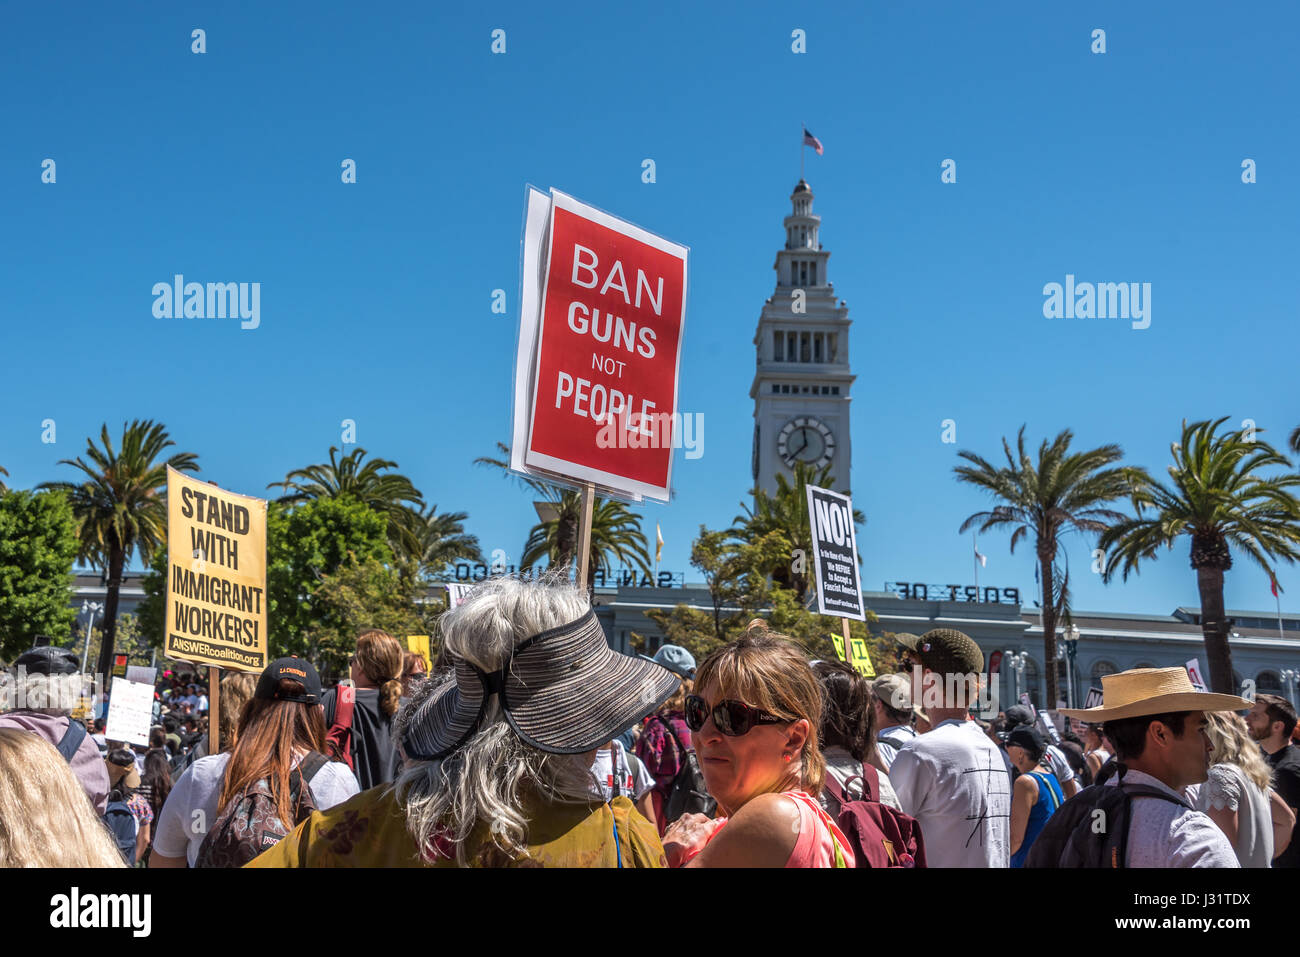 San Francisco, California, USA. 1st May, 2017. Protesters gather at Justin Herman Plaza by the San Francisco Ferry Building for a rally before the 'Day Without Immigrants' march. Thousands marched down Market Street to Civic Center Plaza in the event, protesting Donald Trump's immigration policies. Over forty U.S. cities held similar events on May 1 to coincide with International Workers' Day or May Day. Credit: Shelly Rivoli/Alamy Live News Stock Photo